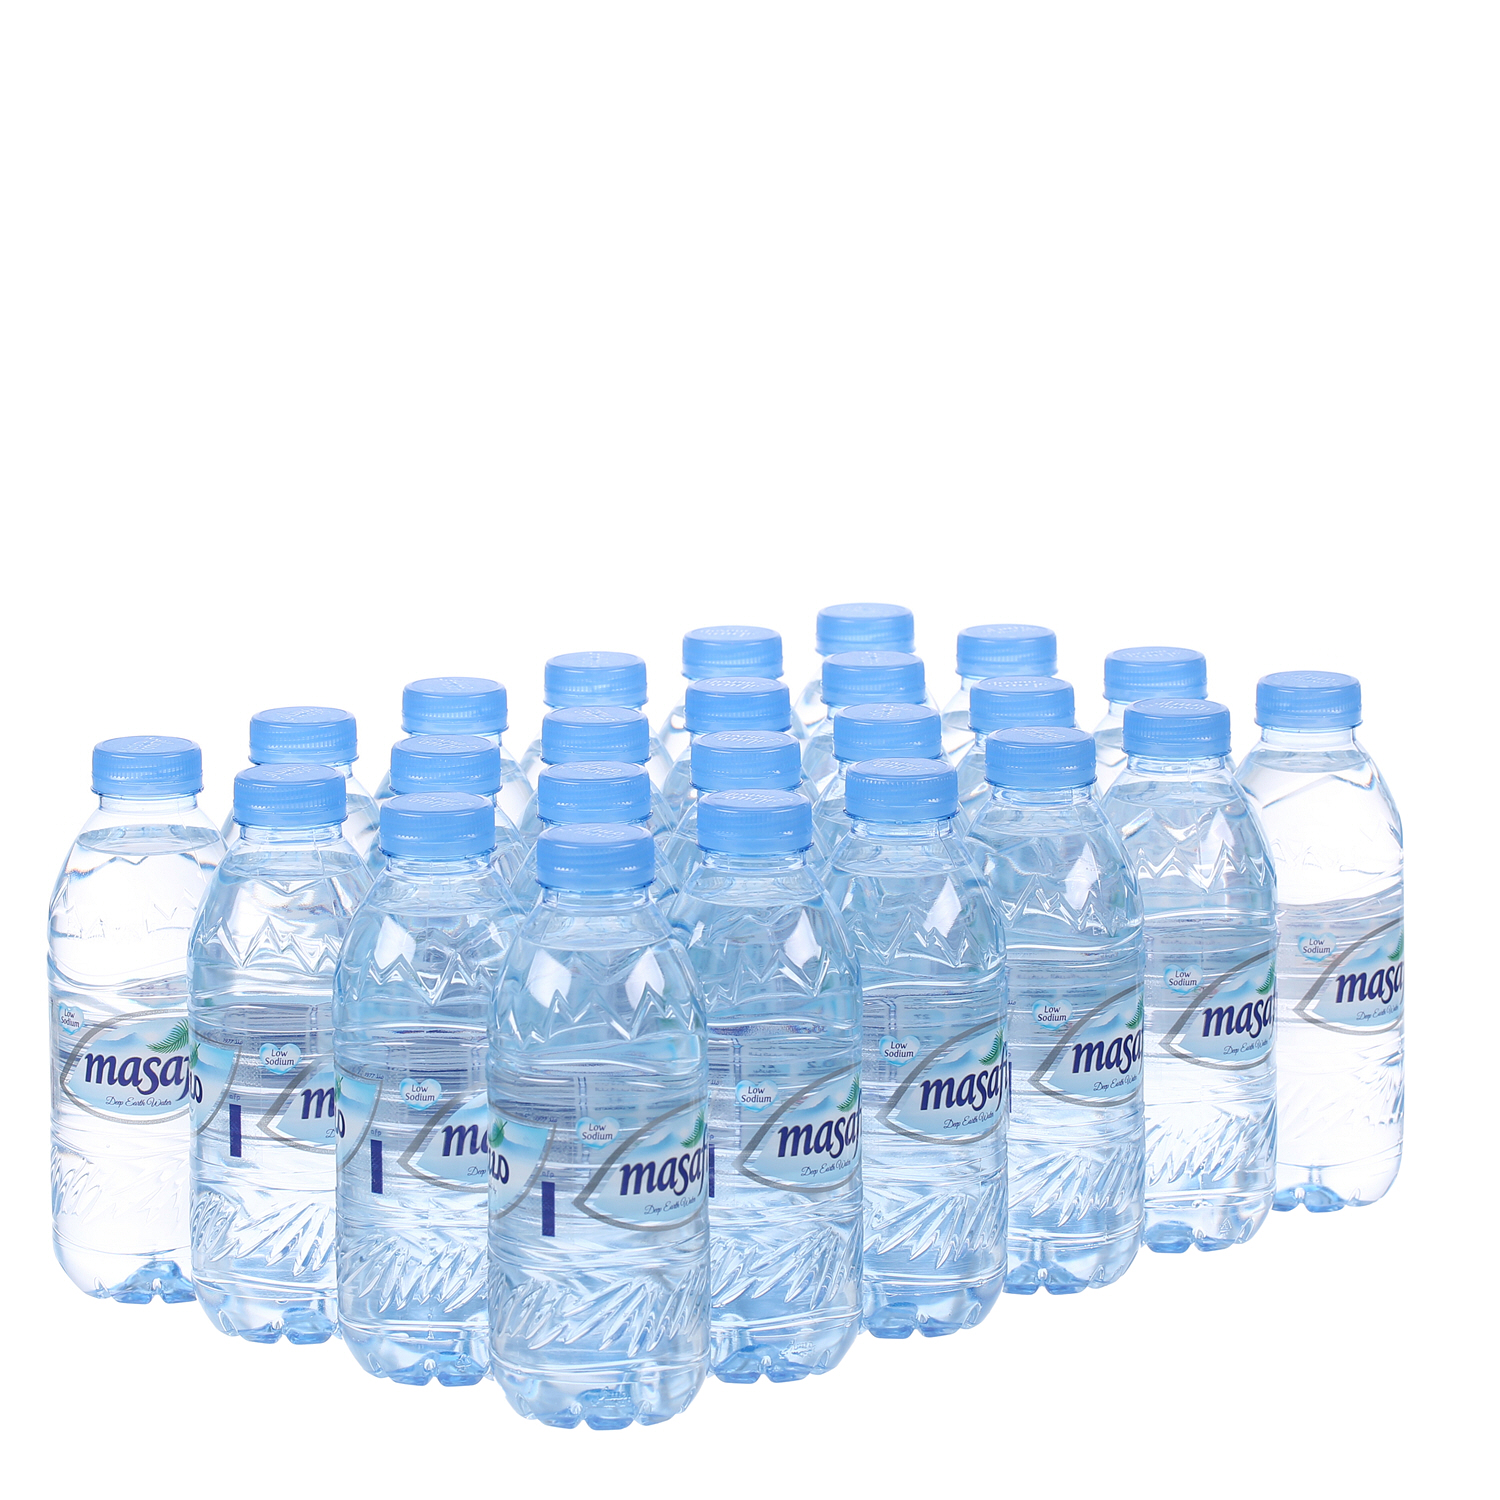 Masafi Mineral Water 330 ml - 24 Pack